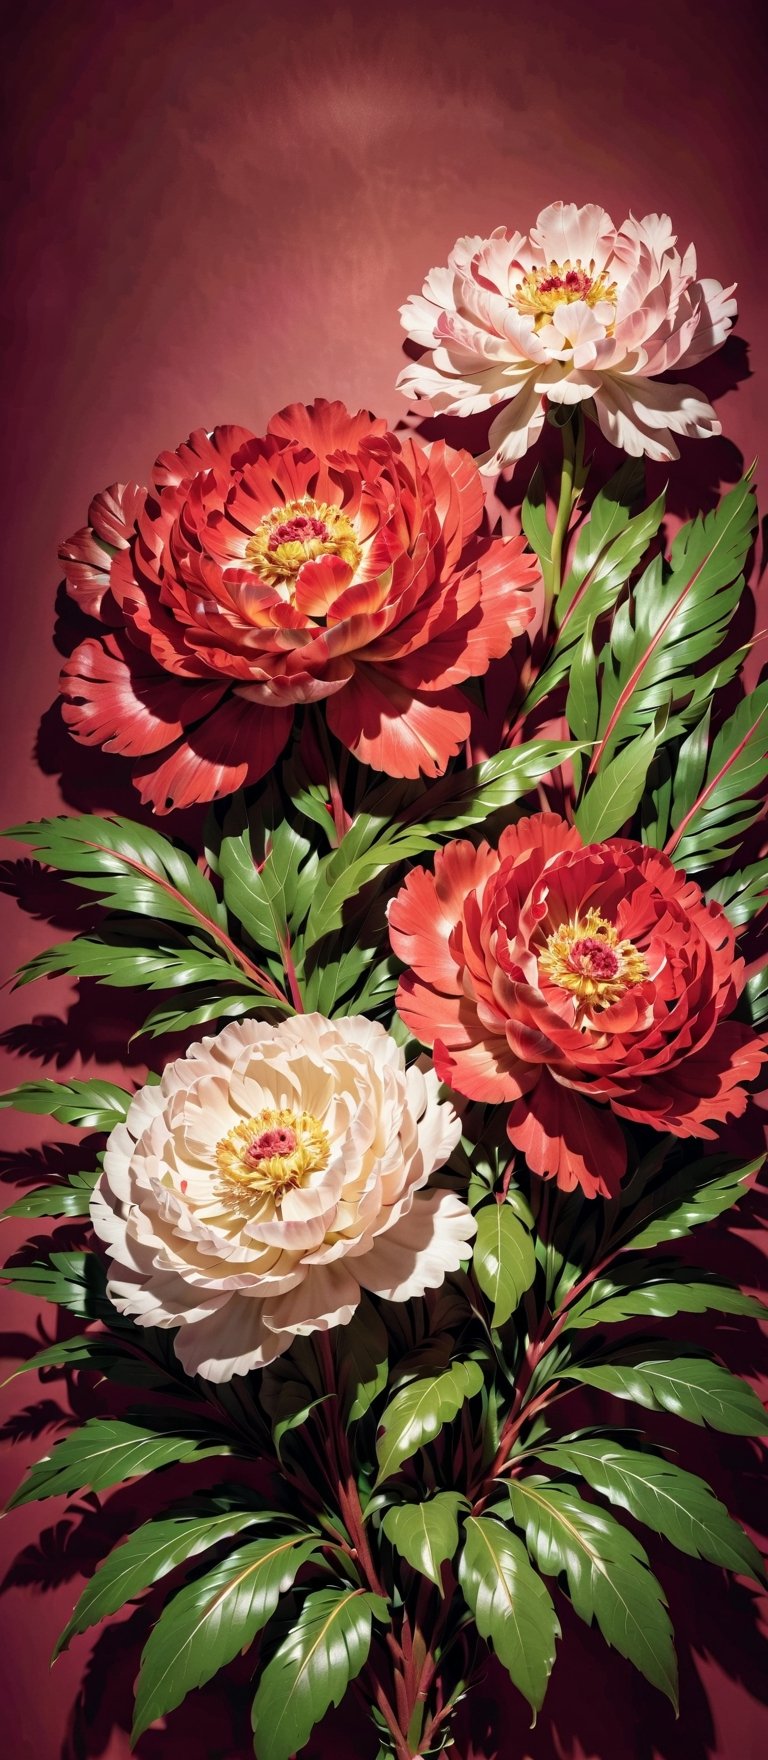 Red and Pink and White three big peony flowers in full bloom, flowers are properly mixed with leaves, peony flowers that glow as subtle as neon signs, spring leaves background

Red